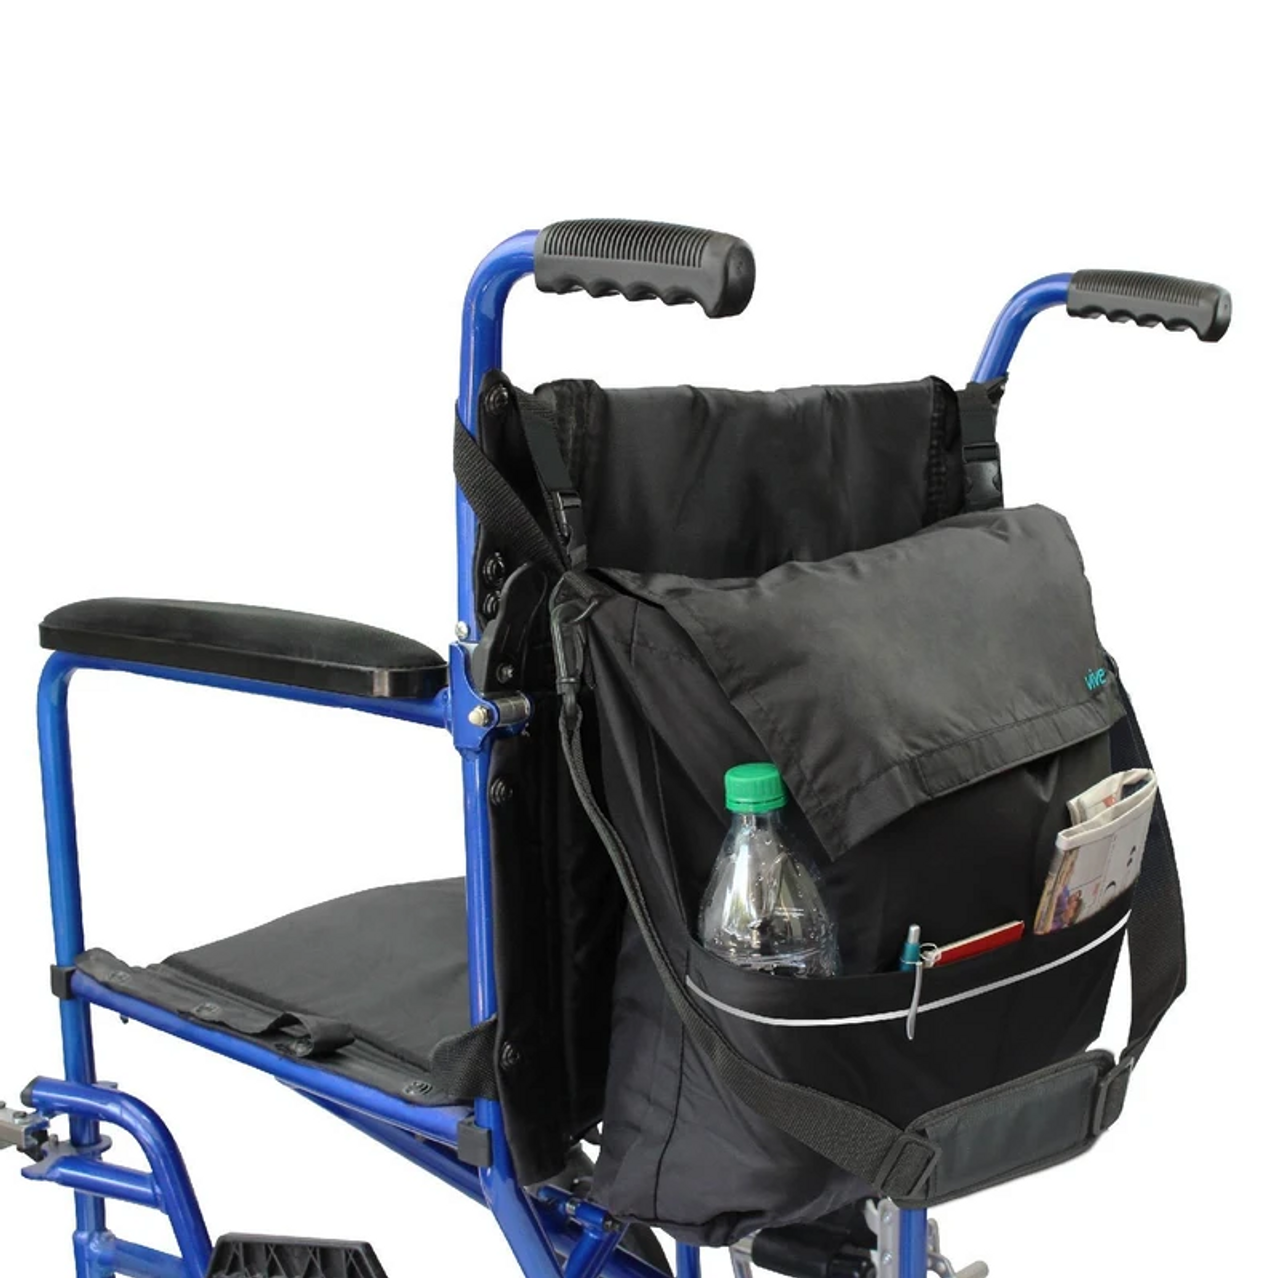 Amazon.com: HEINSY Wheelchair Bag-Mobility Aid Package-Great for Electric  Wheelchairs, Electric Scooter, Walker Accessories, Lightweight Nurse Bag  and Organizer for Medical Chairs : Health & Household